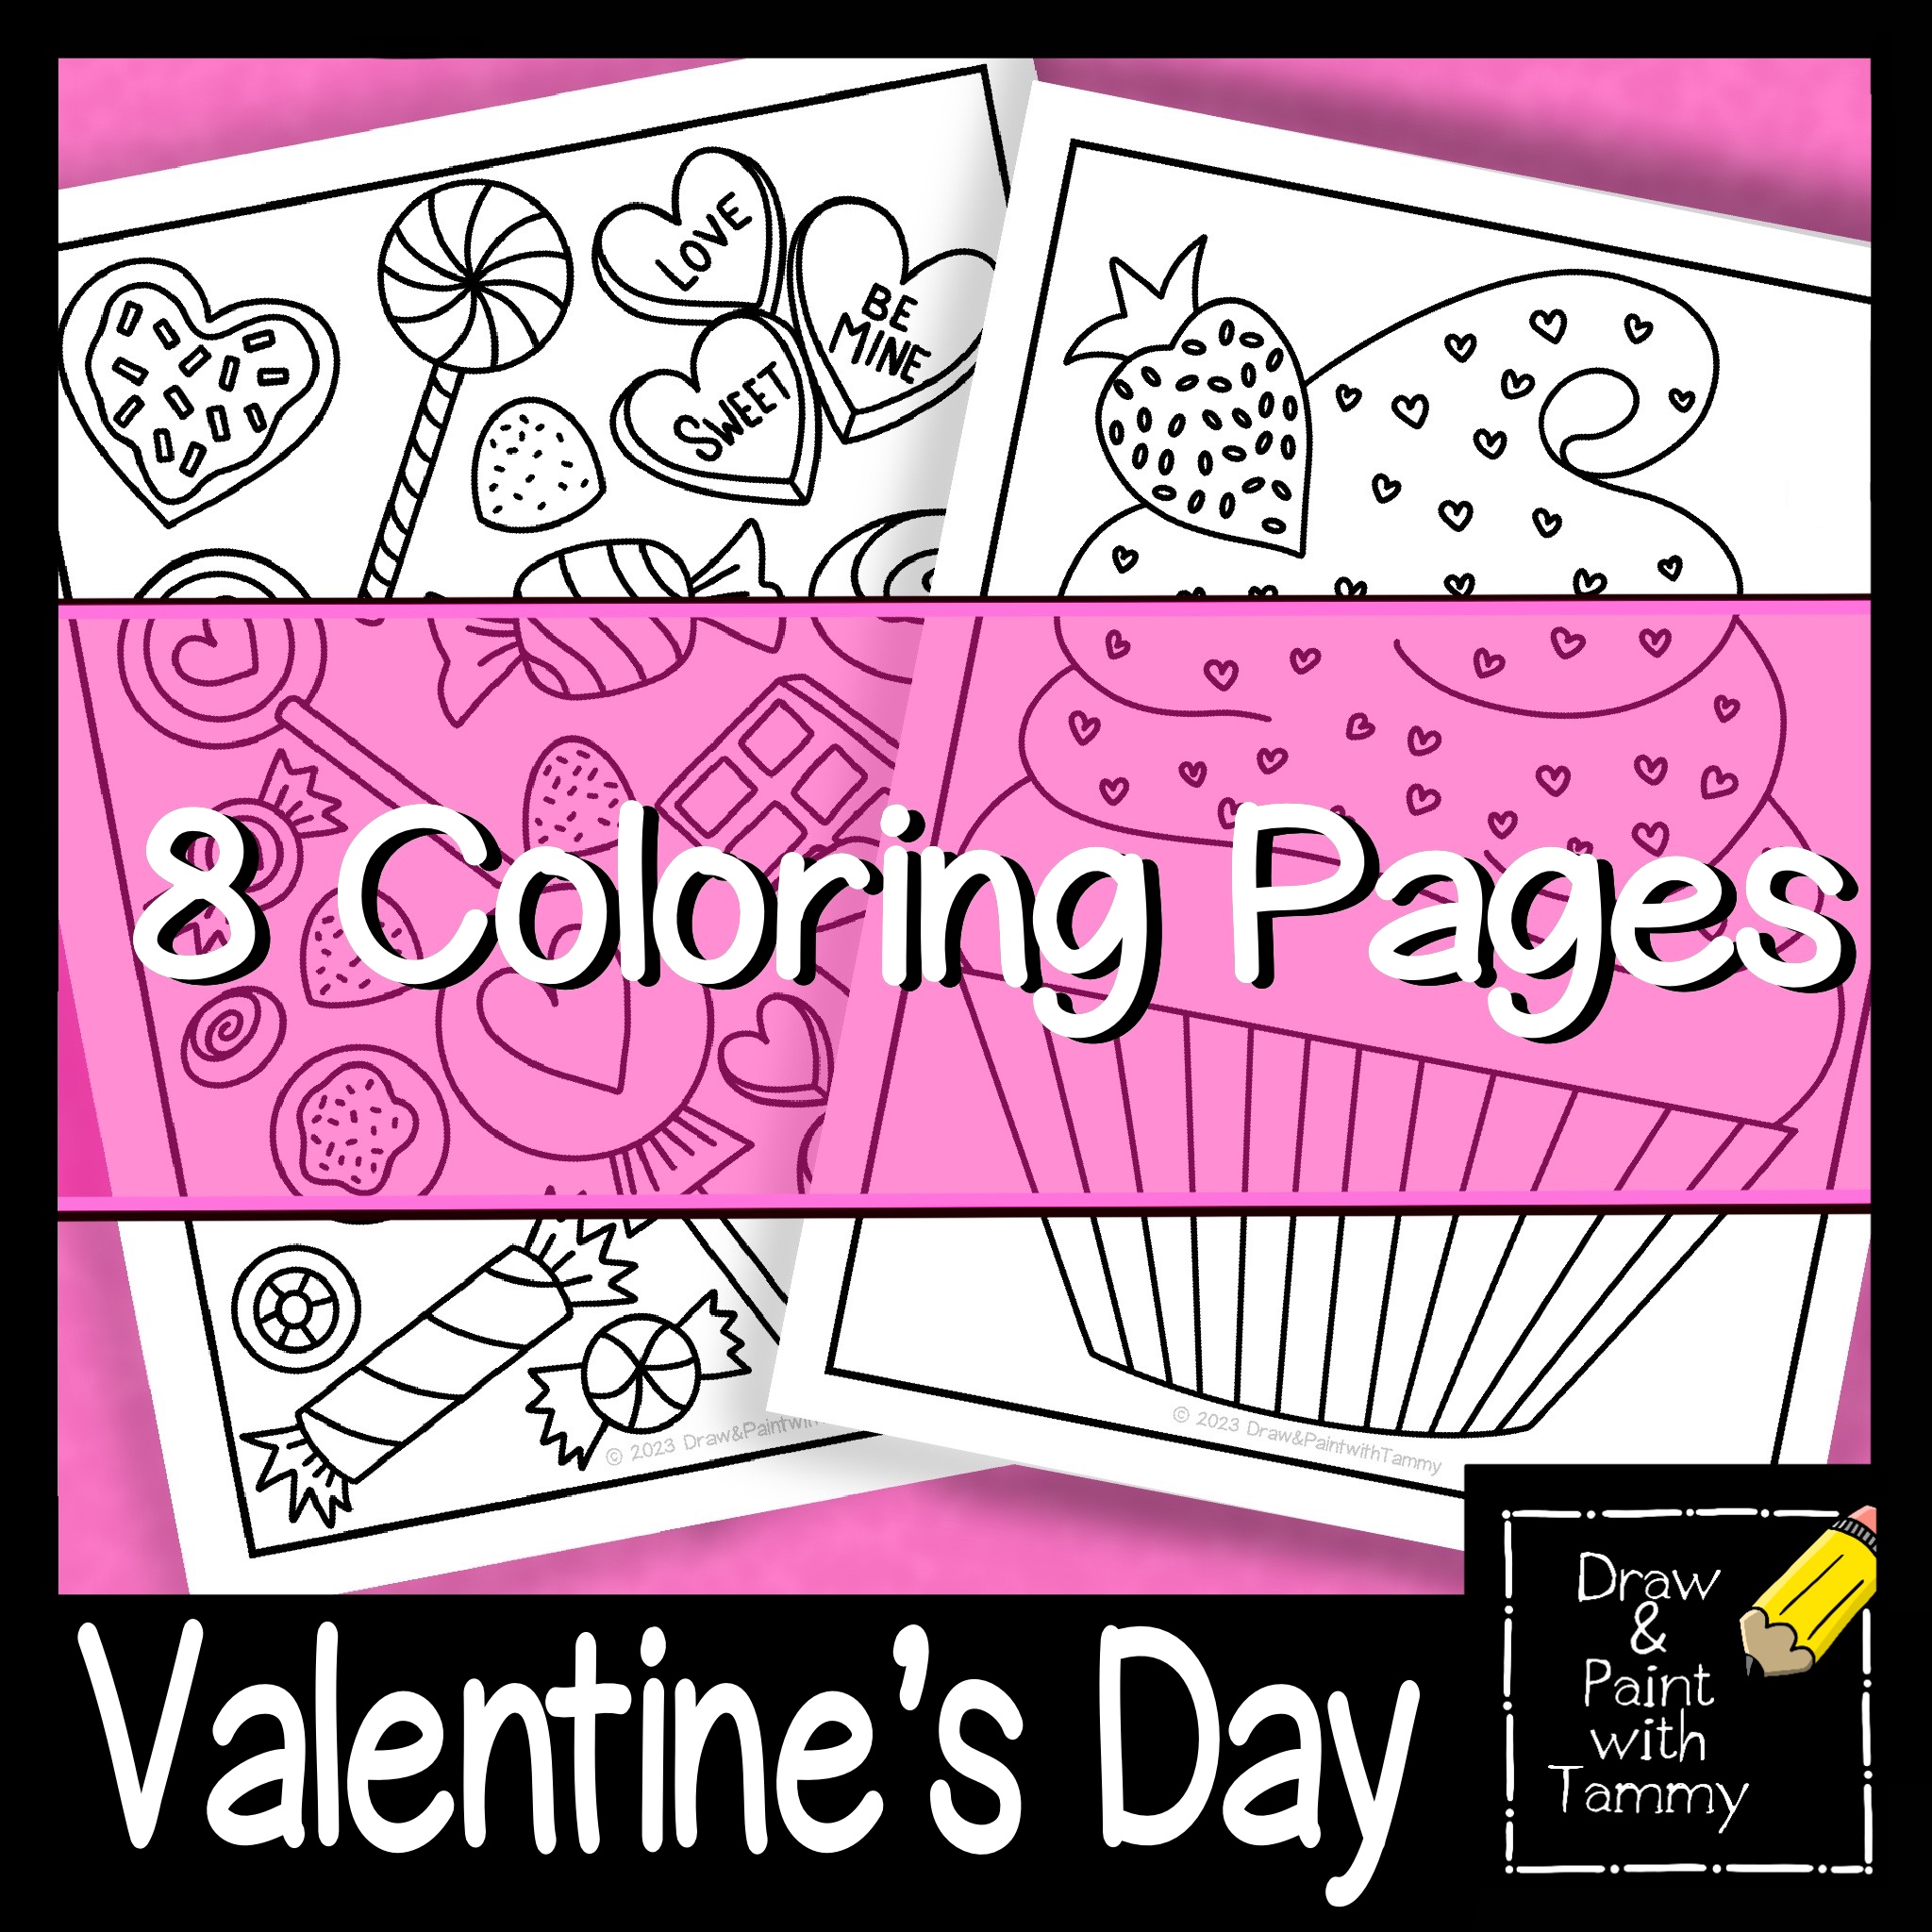 Valentines day theme february printable coloring pages made by teachers